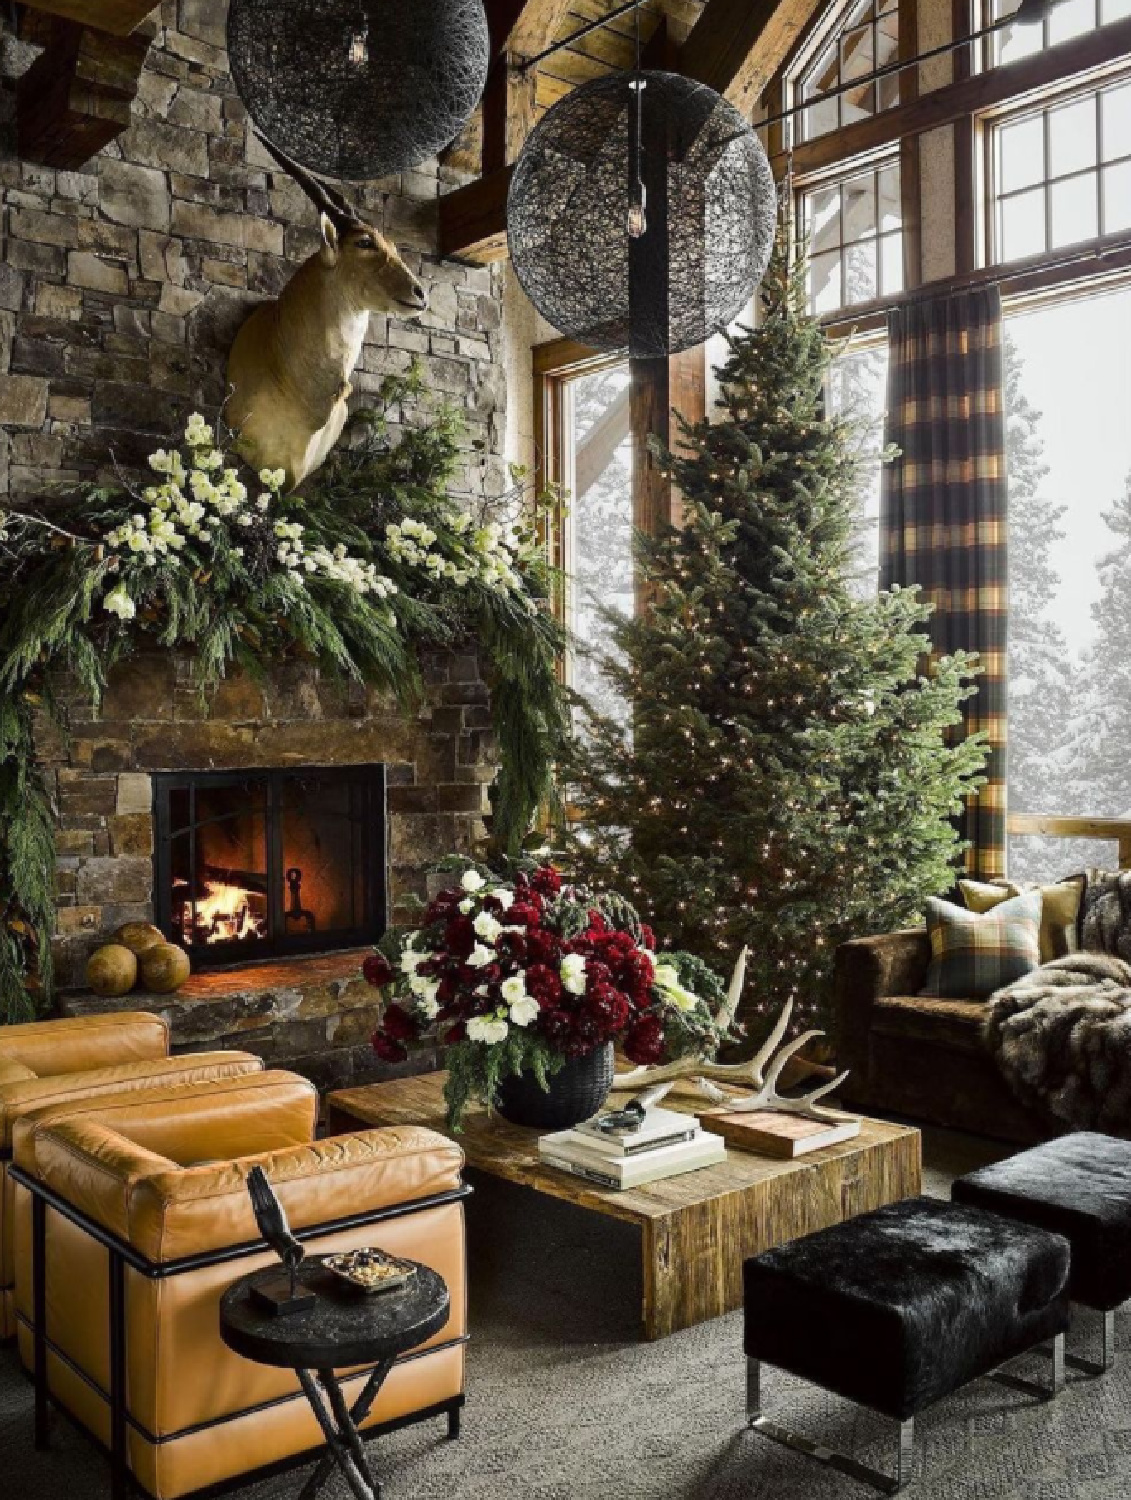 Cozy Mountain Lodge Style: Smart Sources & Inspo Now! - Hello Lovely